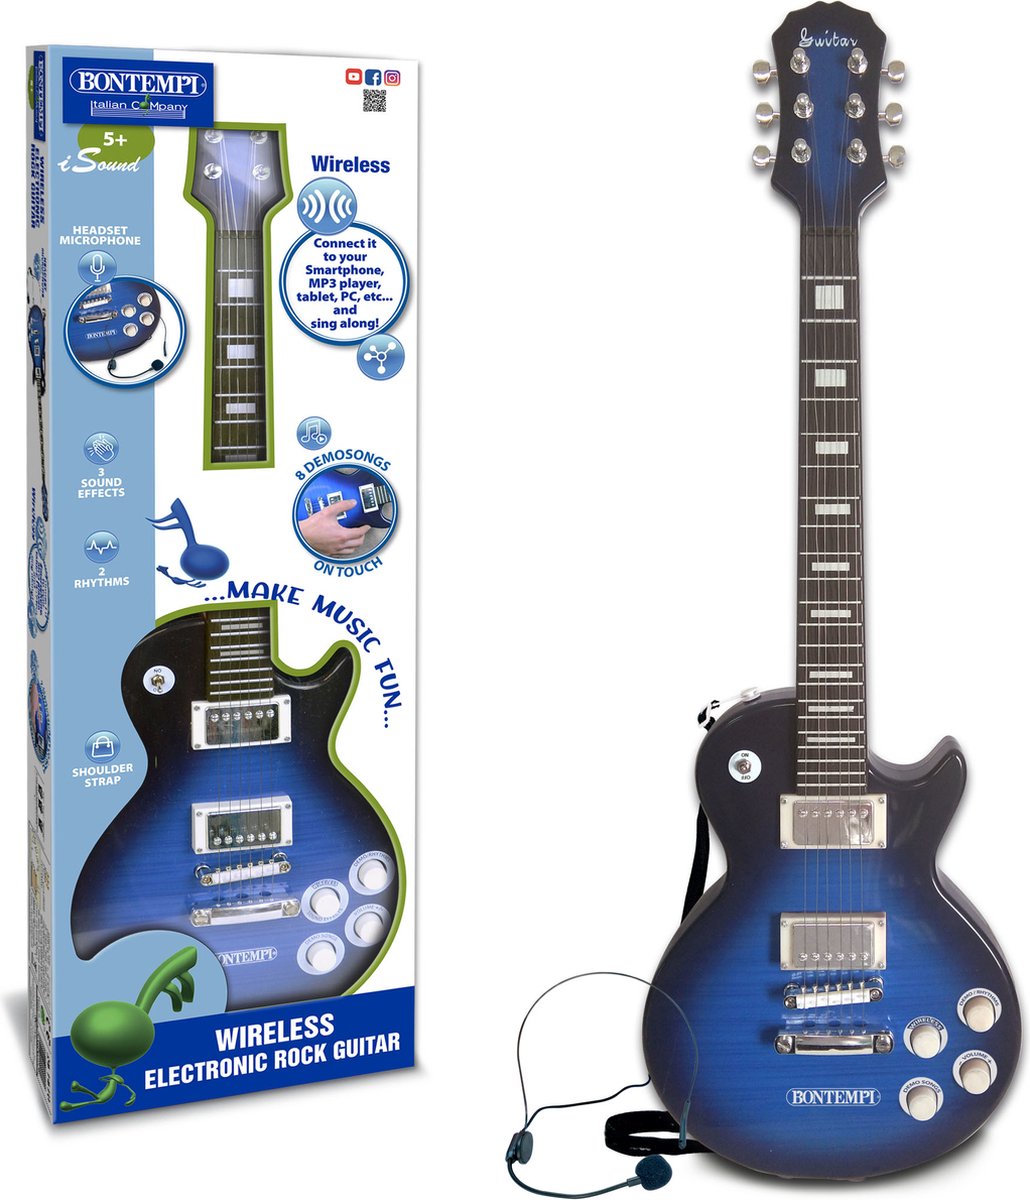 Bontempi Electronic Rock Guitar with Wireless connection | bol.com